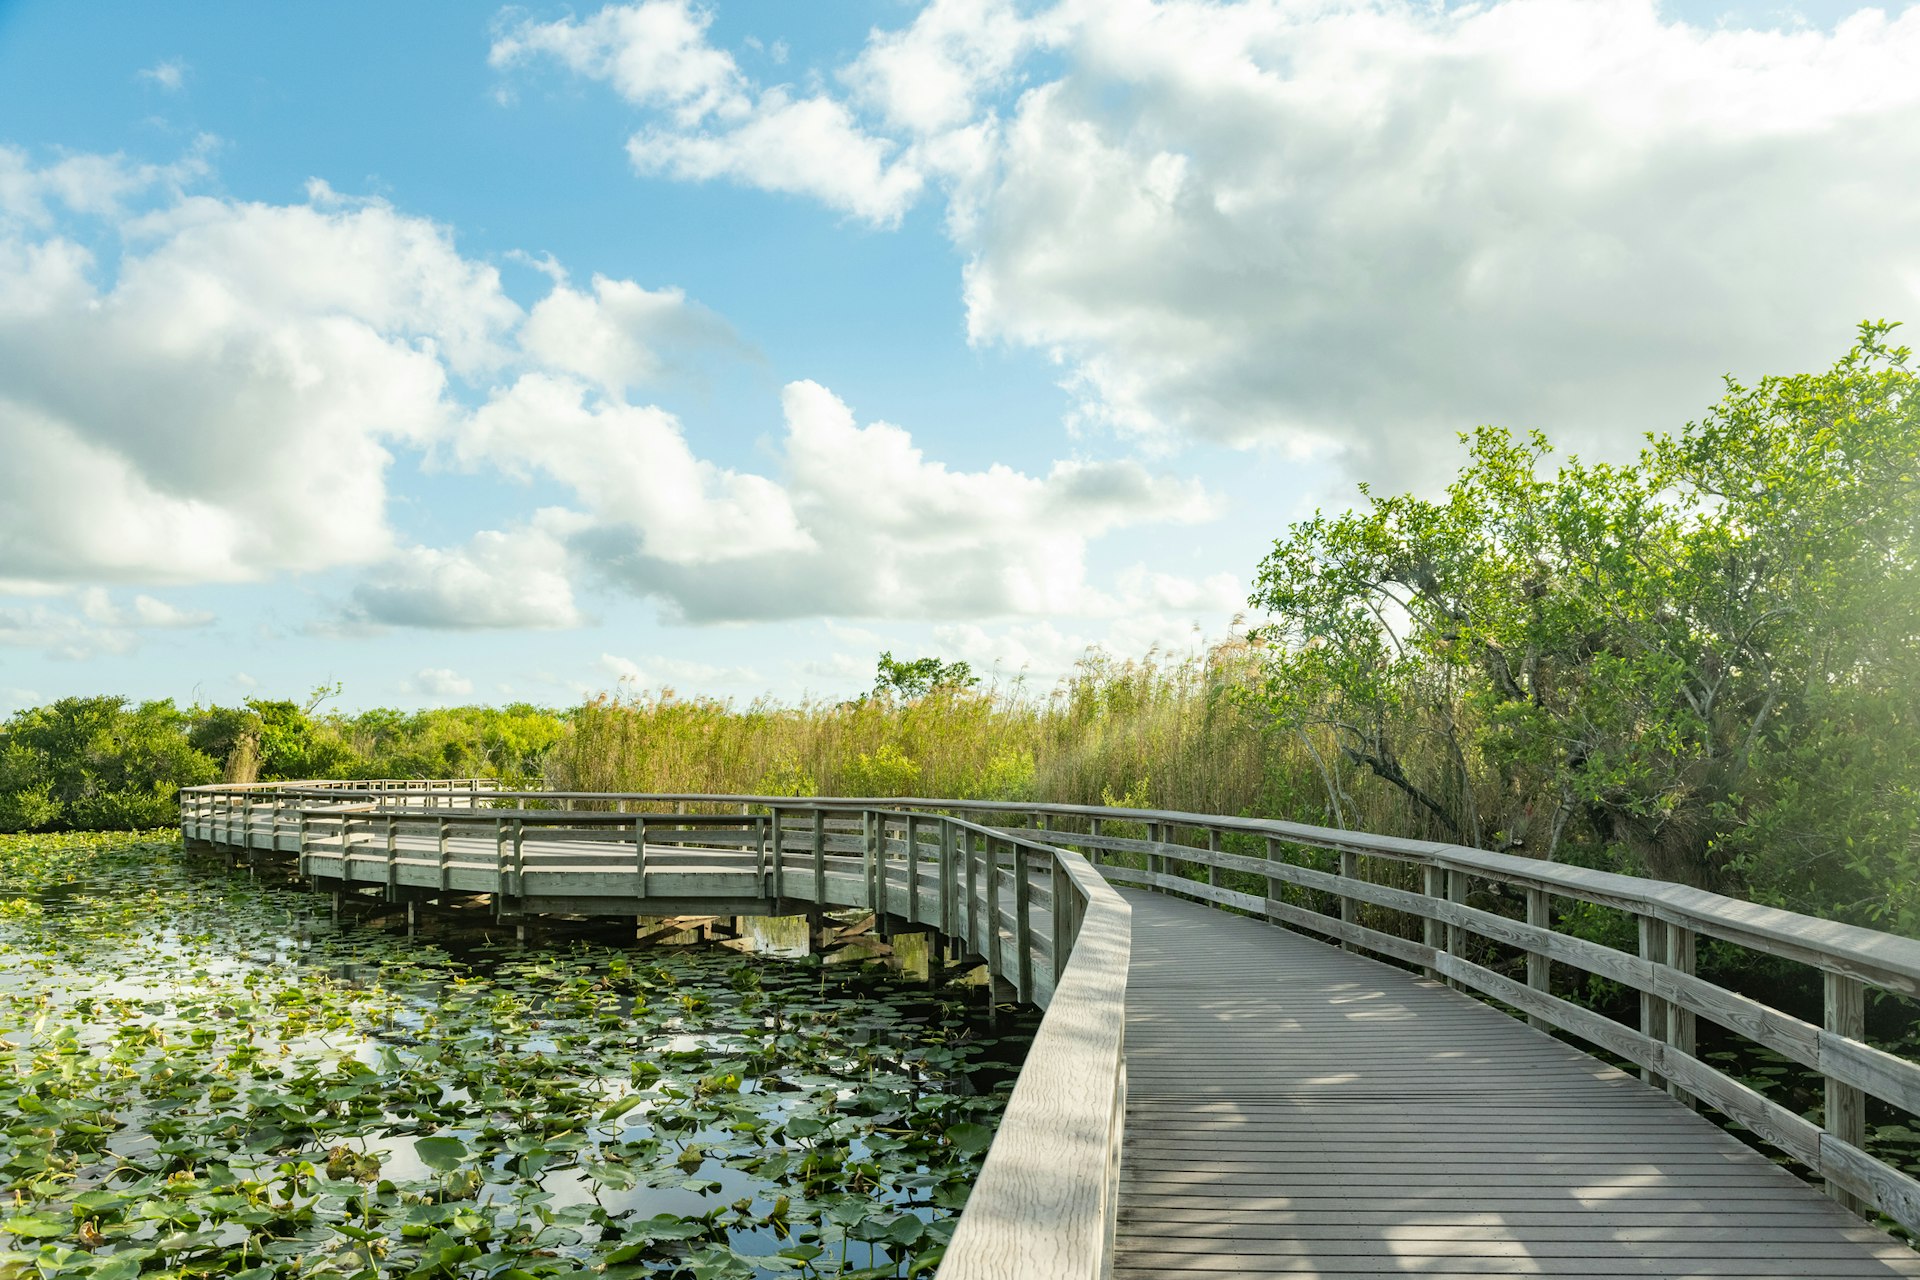 Wooden boardwalk winding over the scenic nature of Everglades National Park on a spring day in Florida, USA